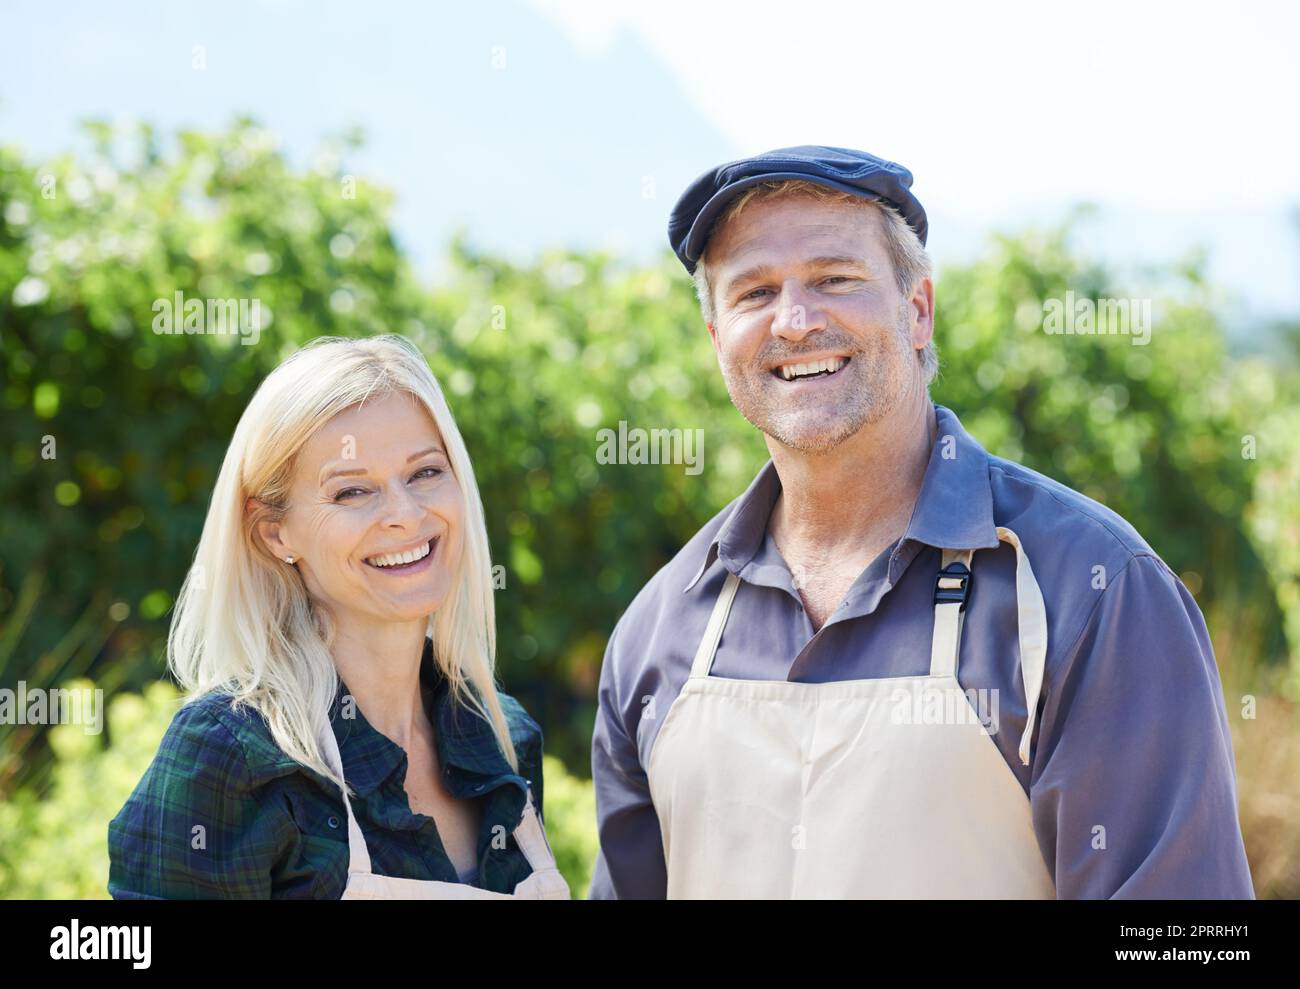 They share a passion for farming. A married couple standing proudly in front of their farm. Stock Photo